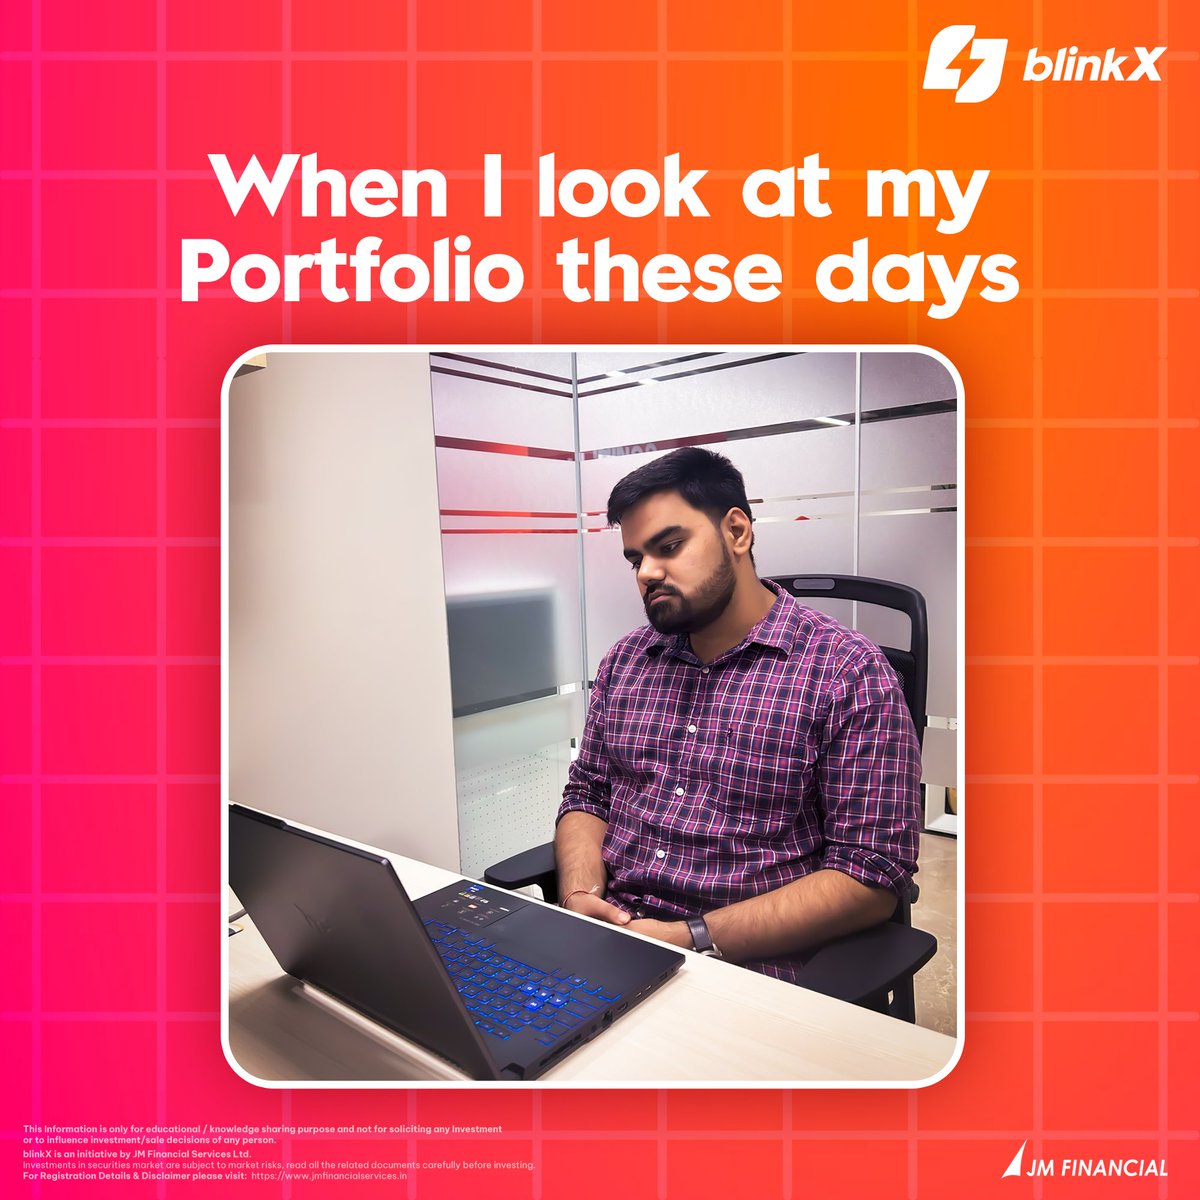 When your portfolio takes a hit, it's normal to feel disheartened. But remember, it's just a temporary setback. How's your portfolio holding up? Comment below!

#Portfolio #Profitandloss #BeARiskTaker #moneymatters #moneymindset #moneymanagement #profitfirst #profitability